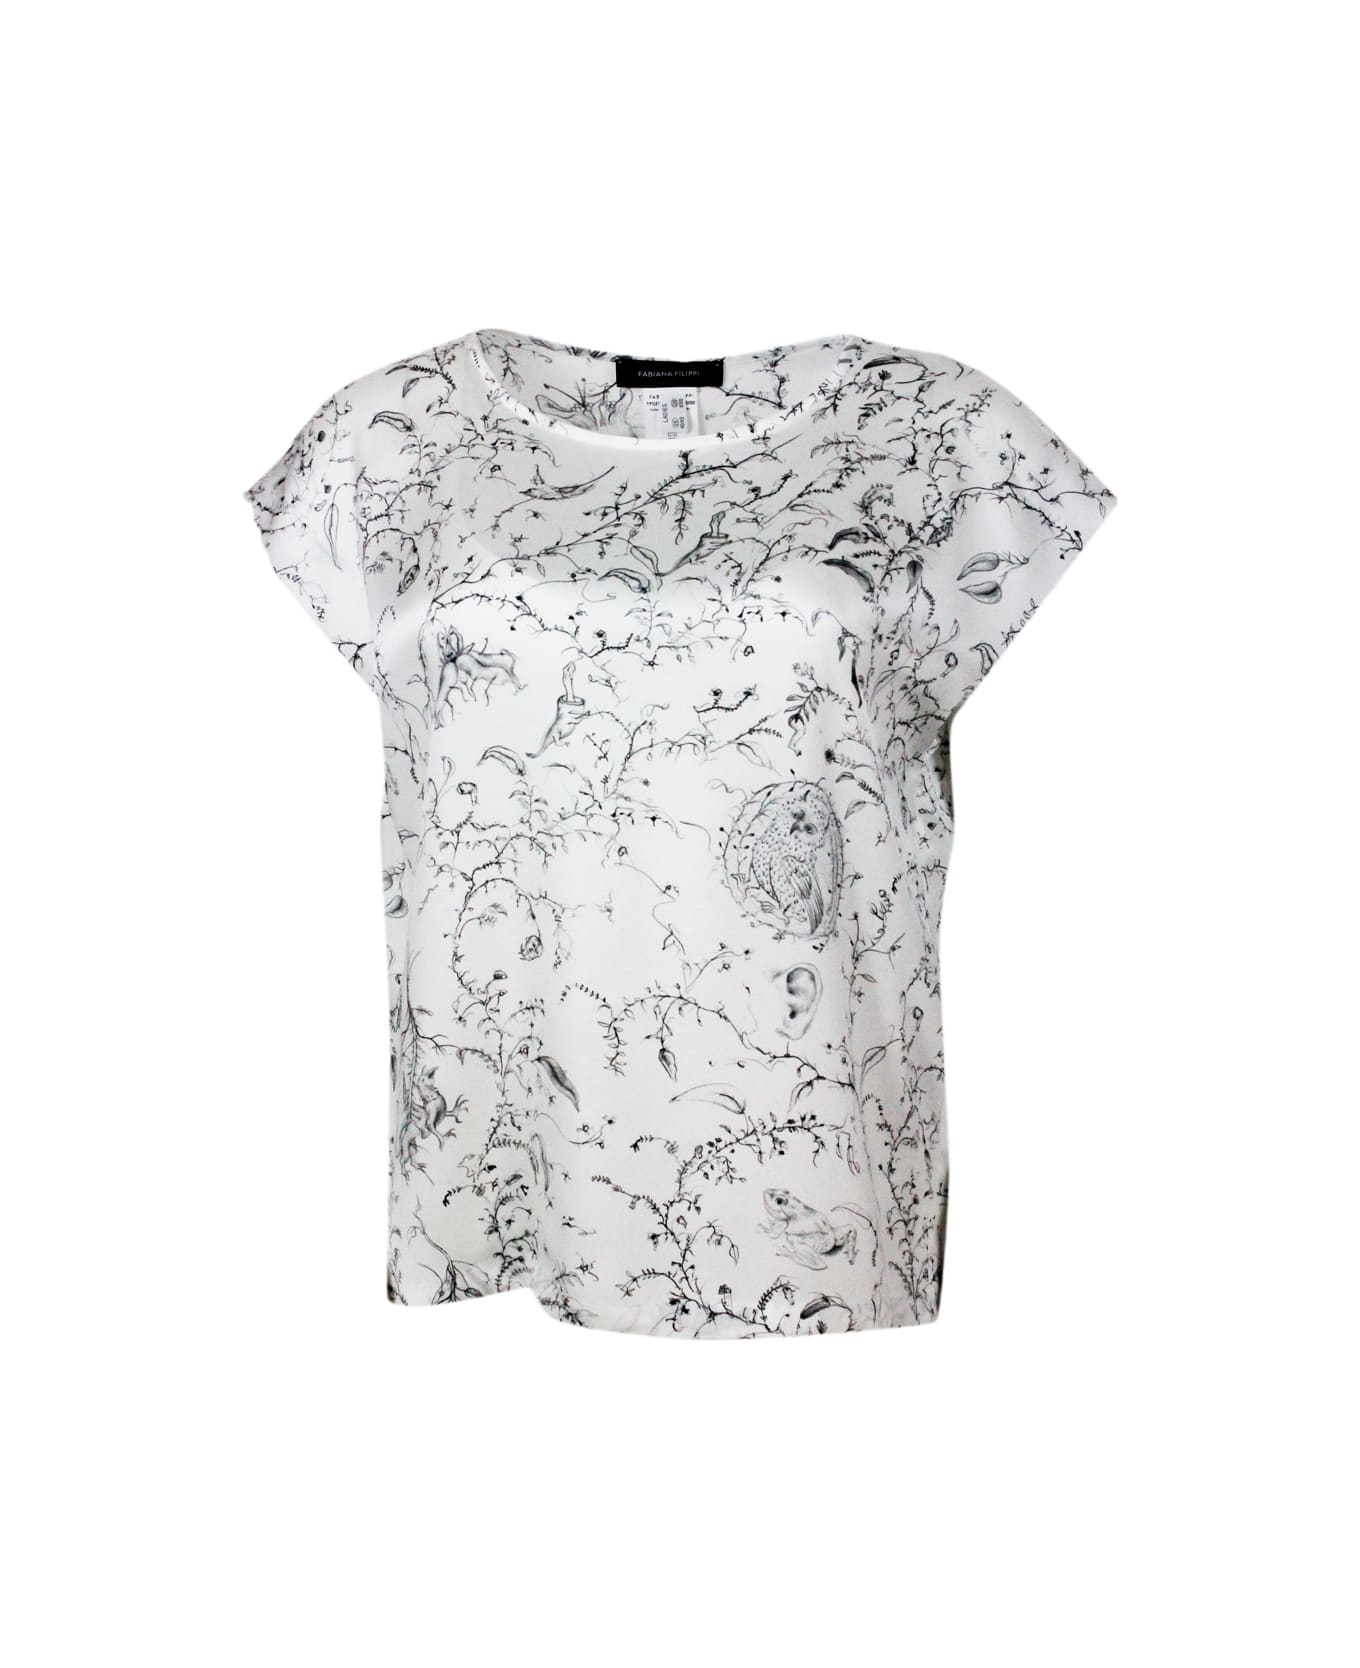 Fabiana Filippi Crew-neck Short-sleeved Silk Shirt With Branches Patterned Print - White